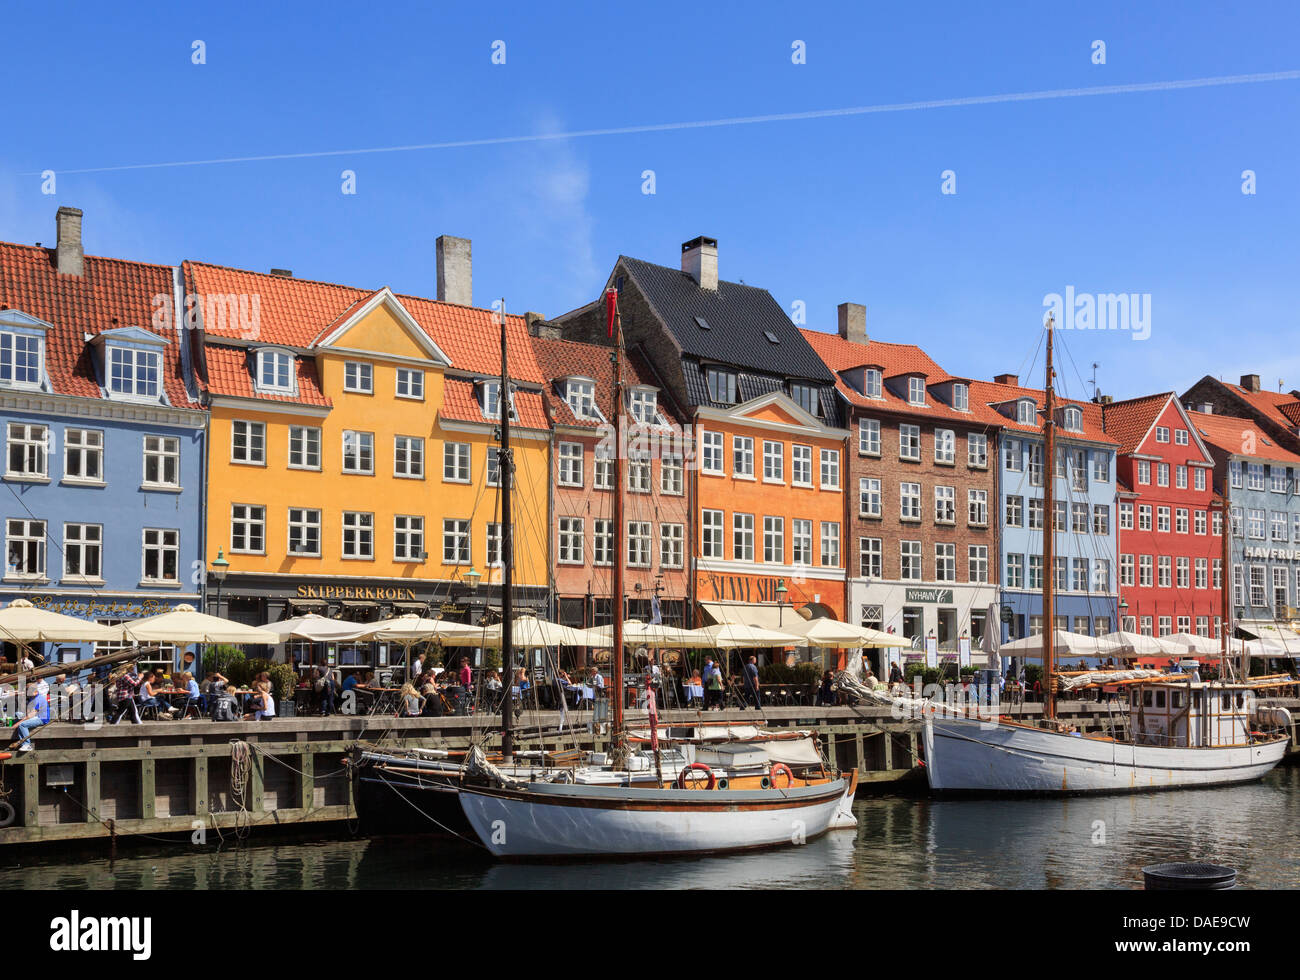 Wooden boats moored on canal with cafes and colourful buildings on waterfront in Nyhavn harbour Copenhagen Zealand Denmark Stock Photo